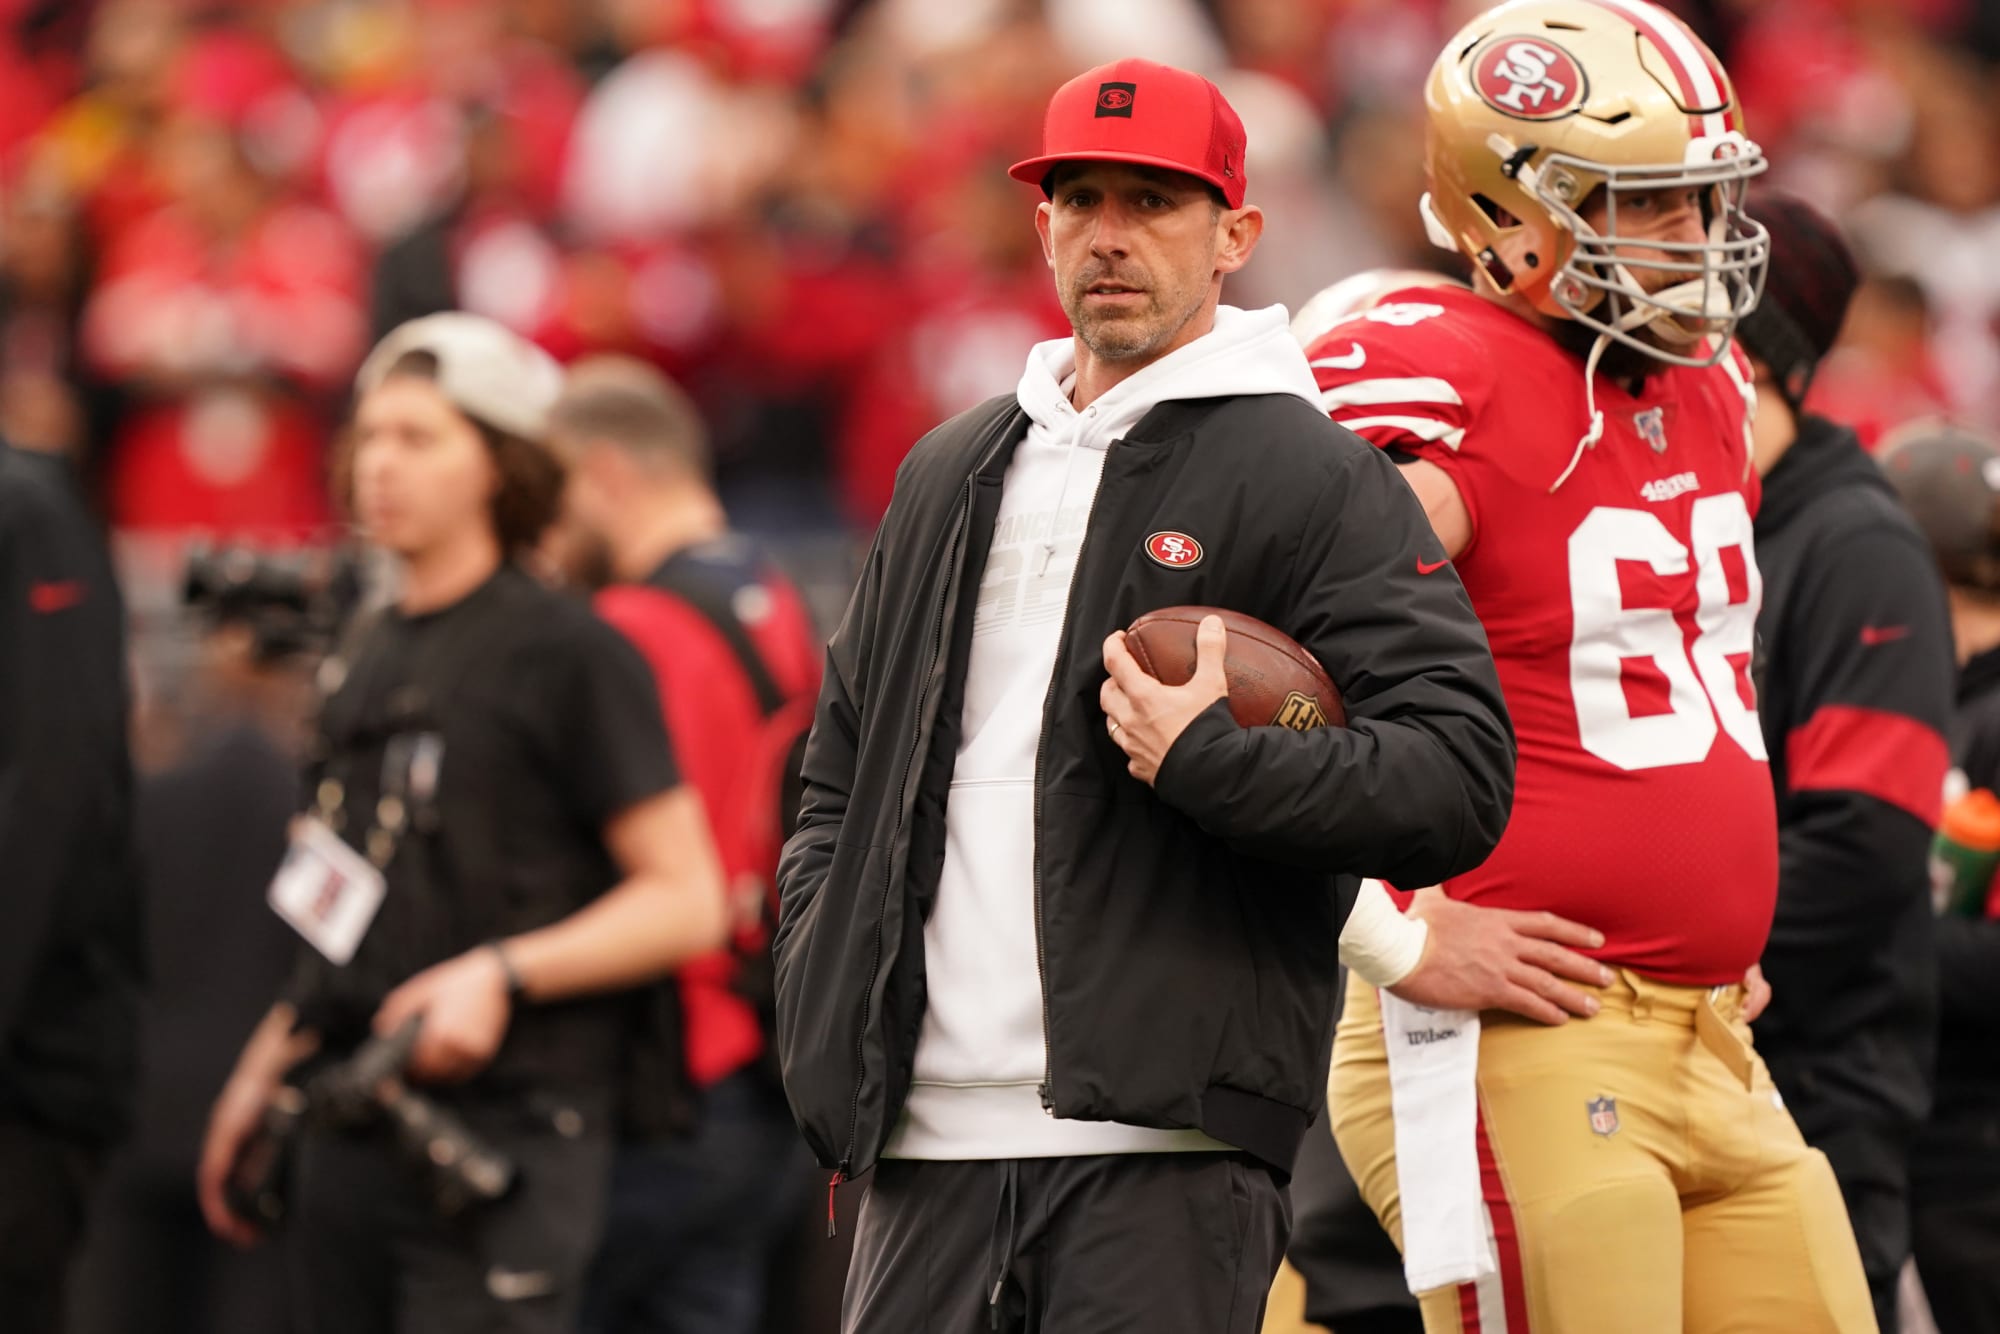 Super Bowl 54: The 49ers offense continues to be overlooked